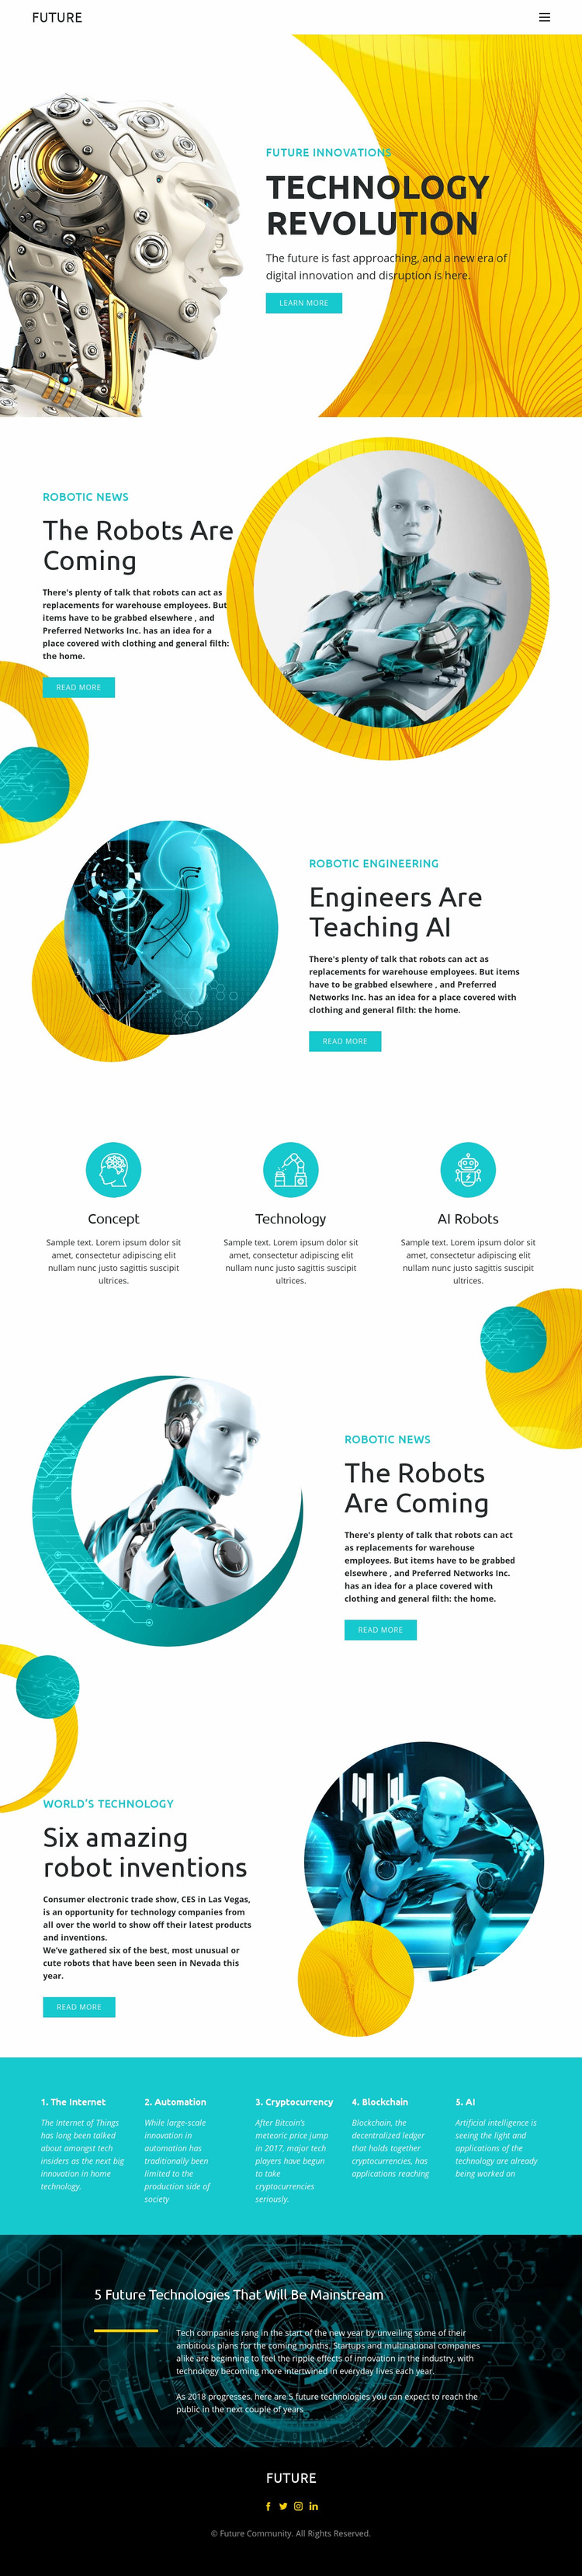 Progress in robot technology  Web Page Design